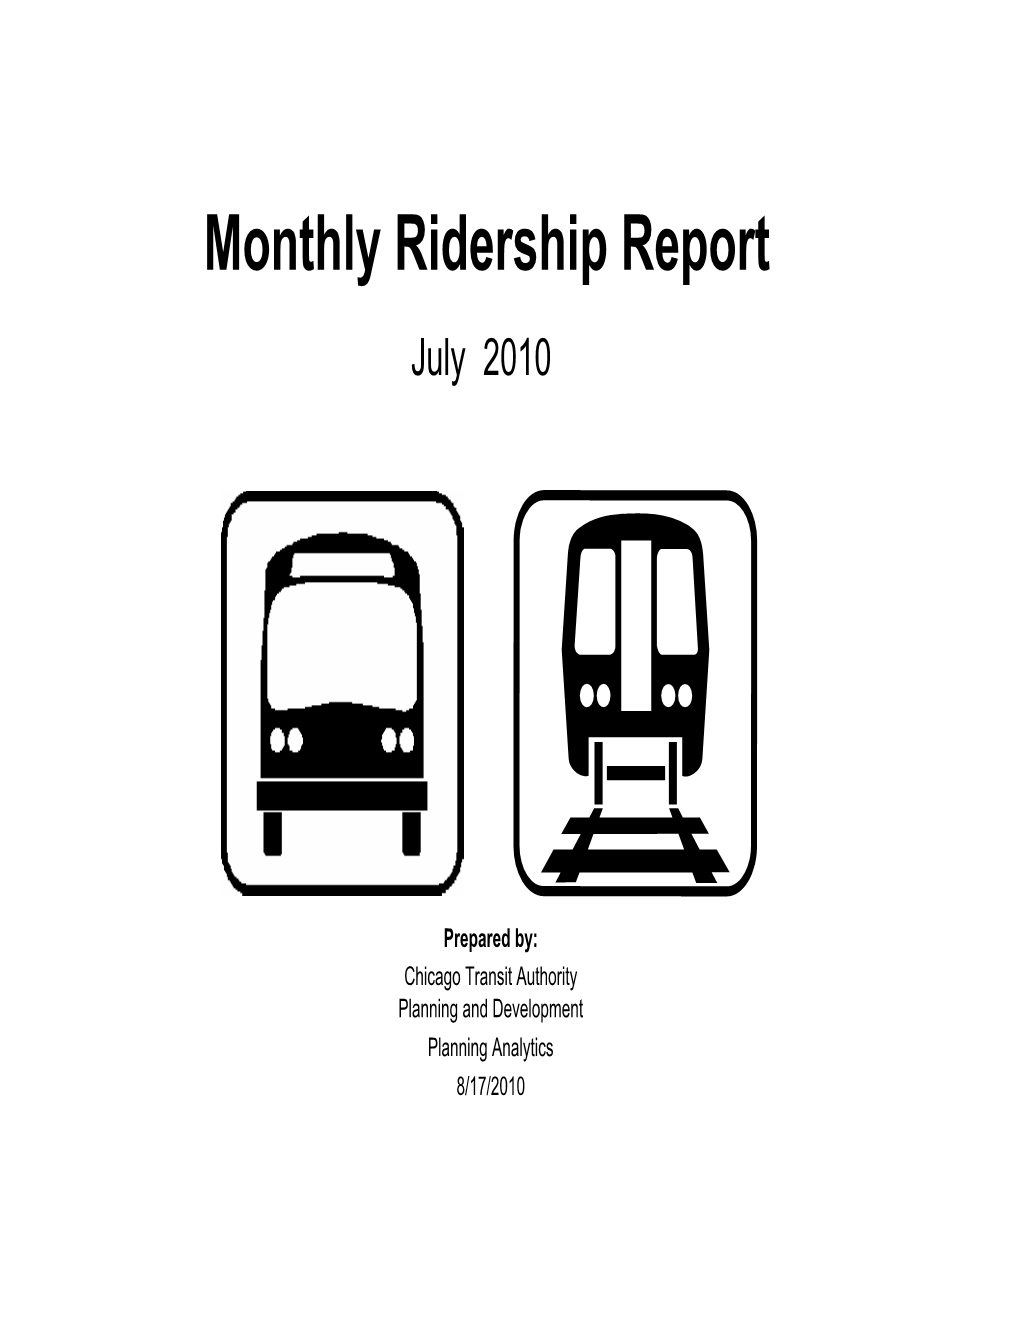 Monthly Ridership Report July 2010